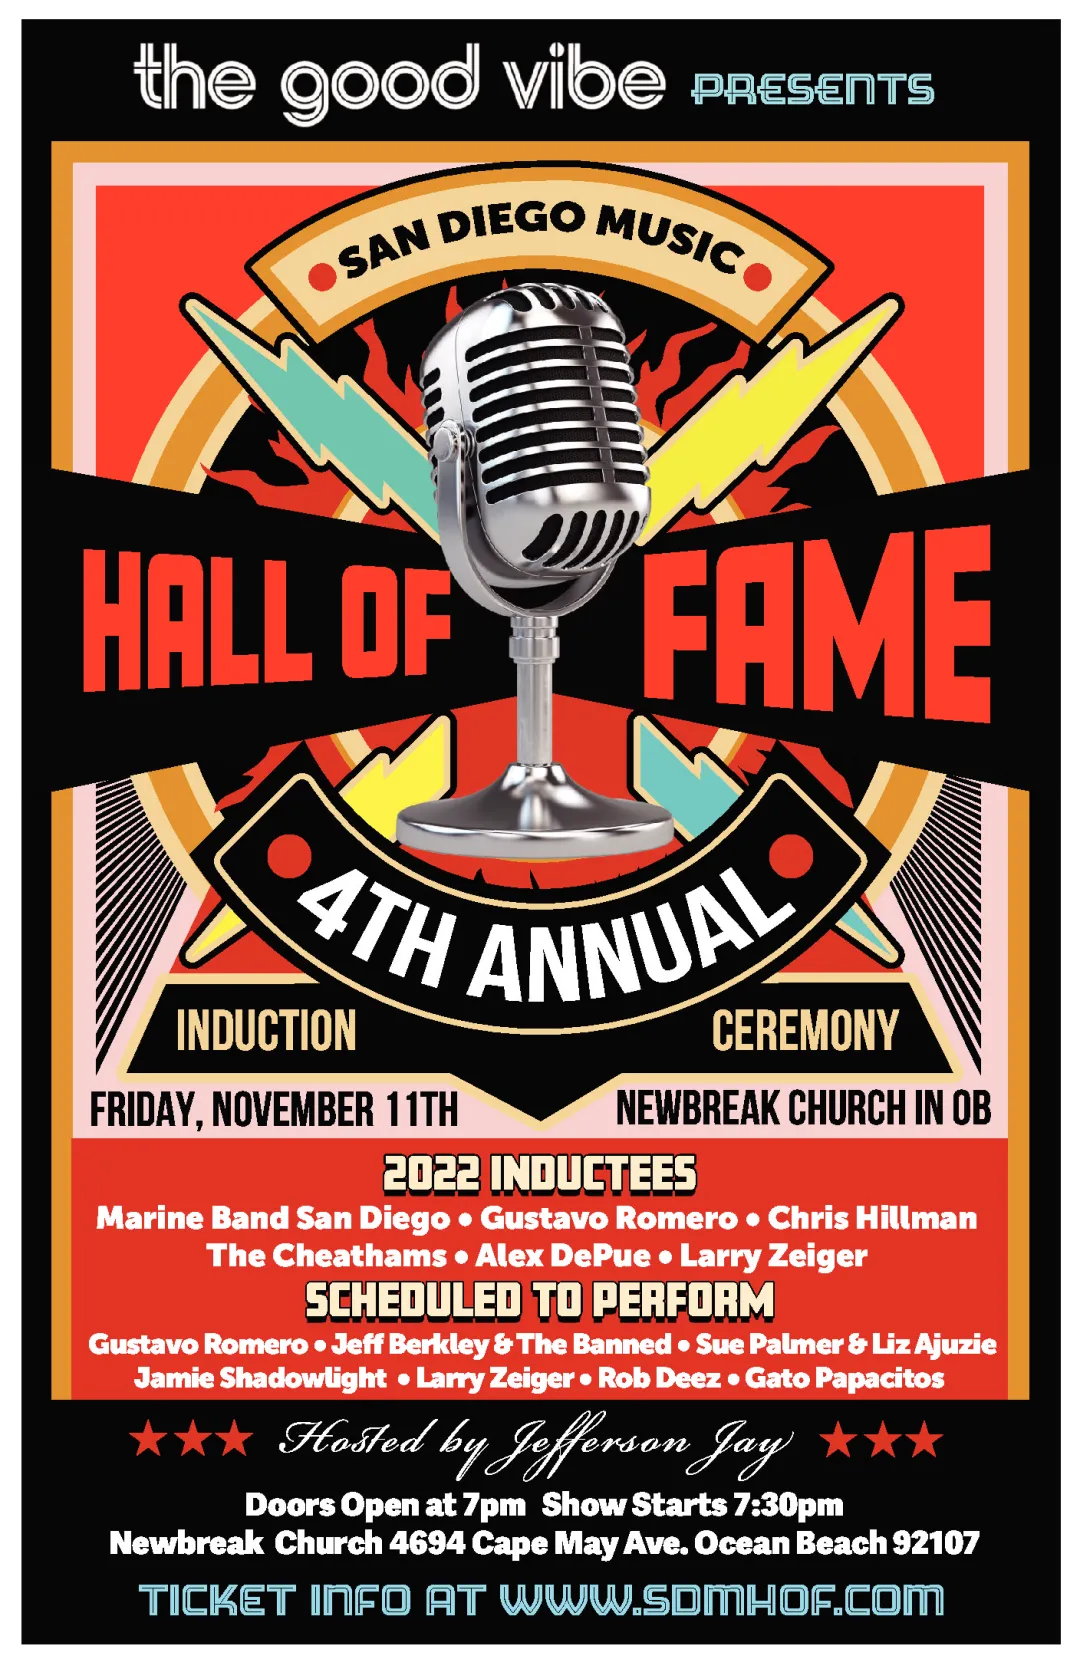 The San Diego Music Hall of Fame 2022